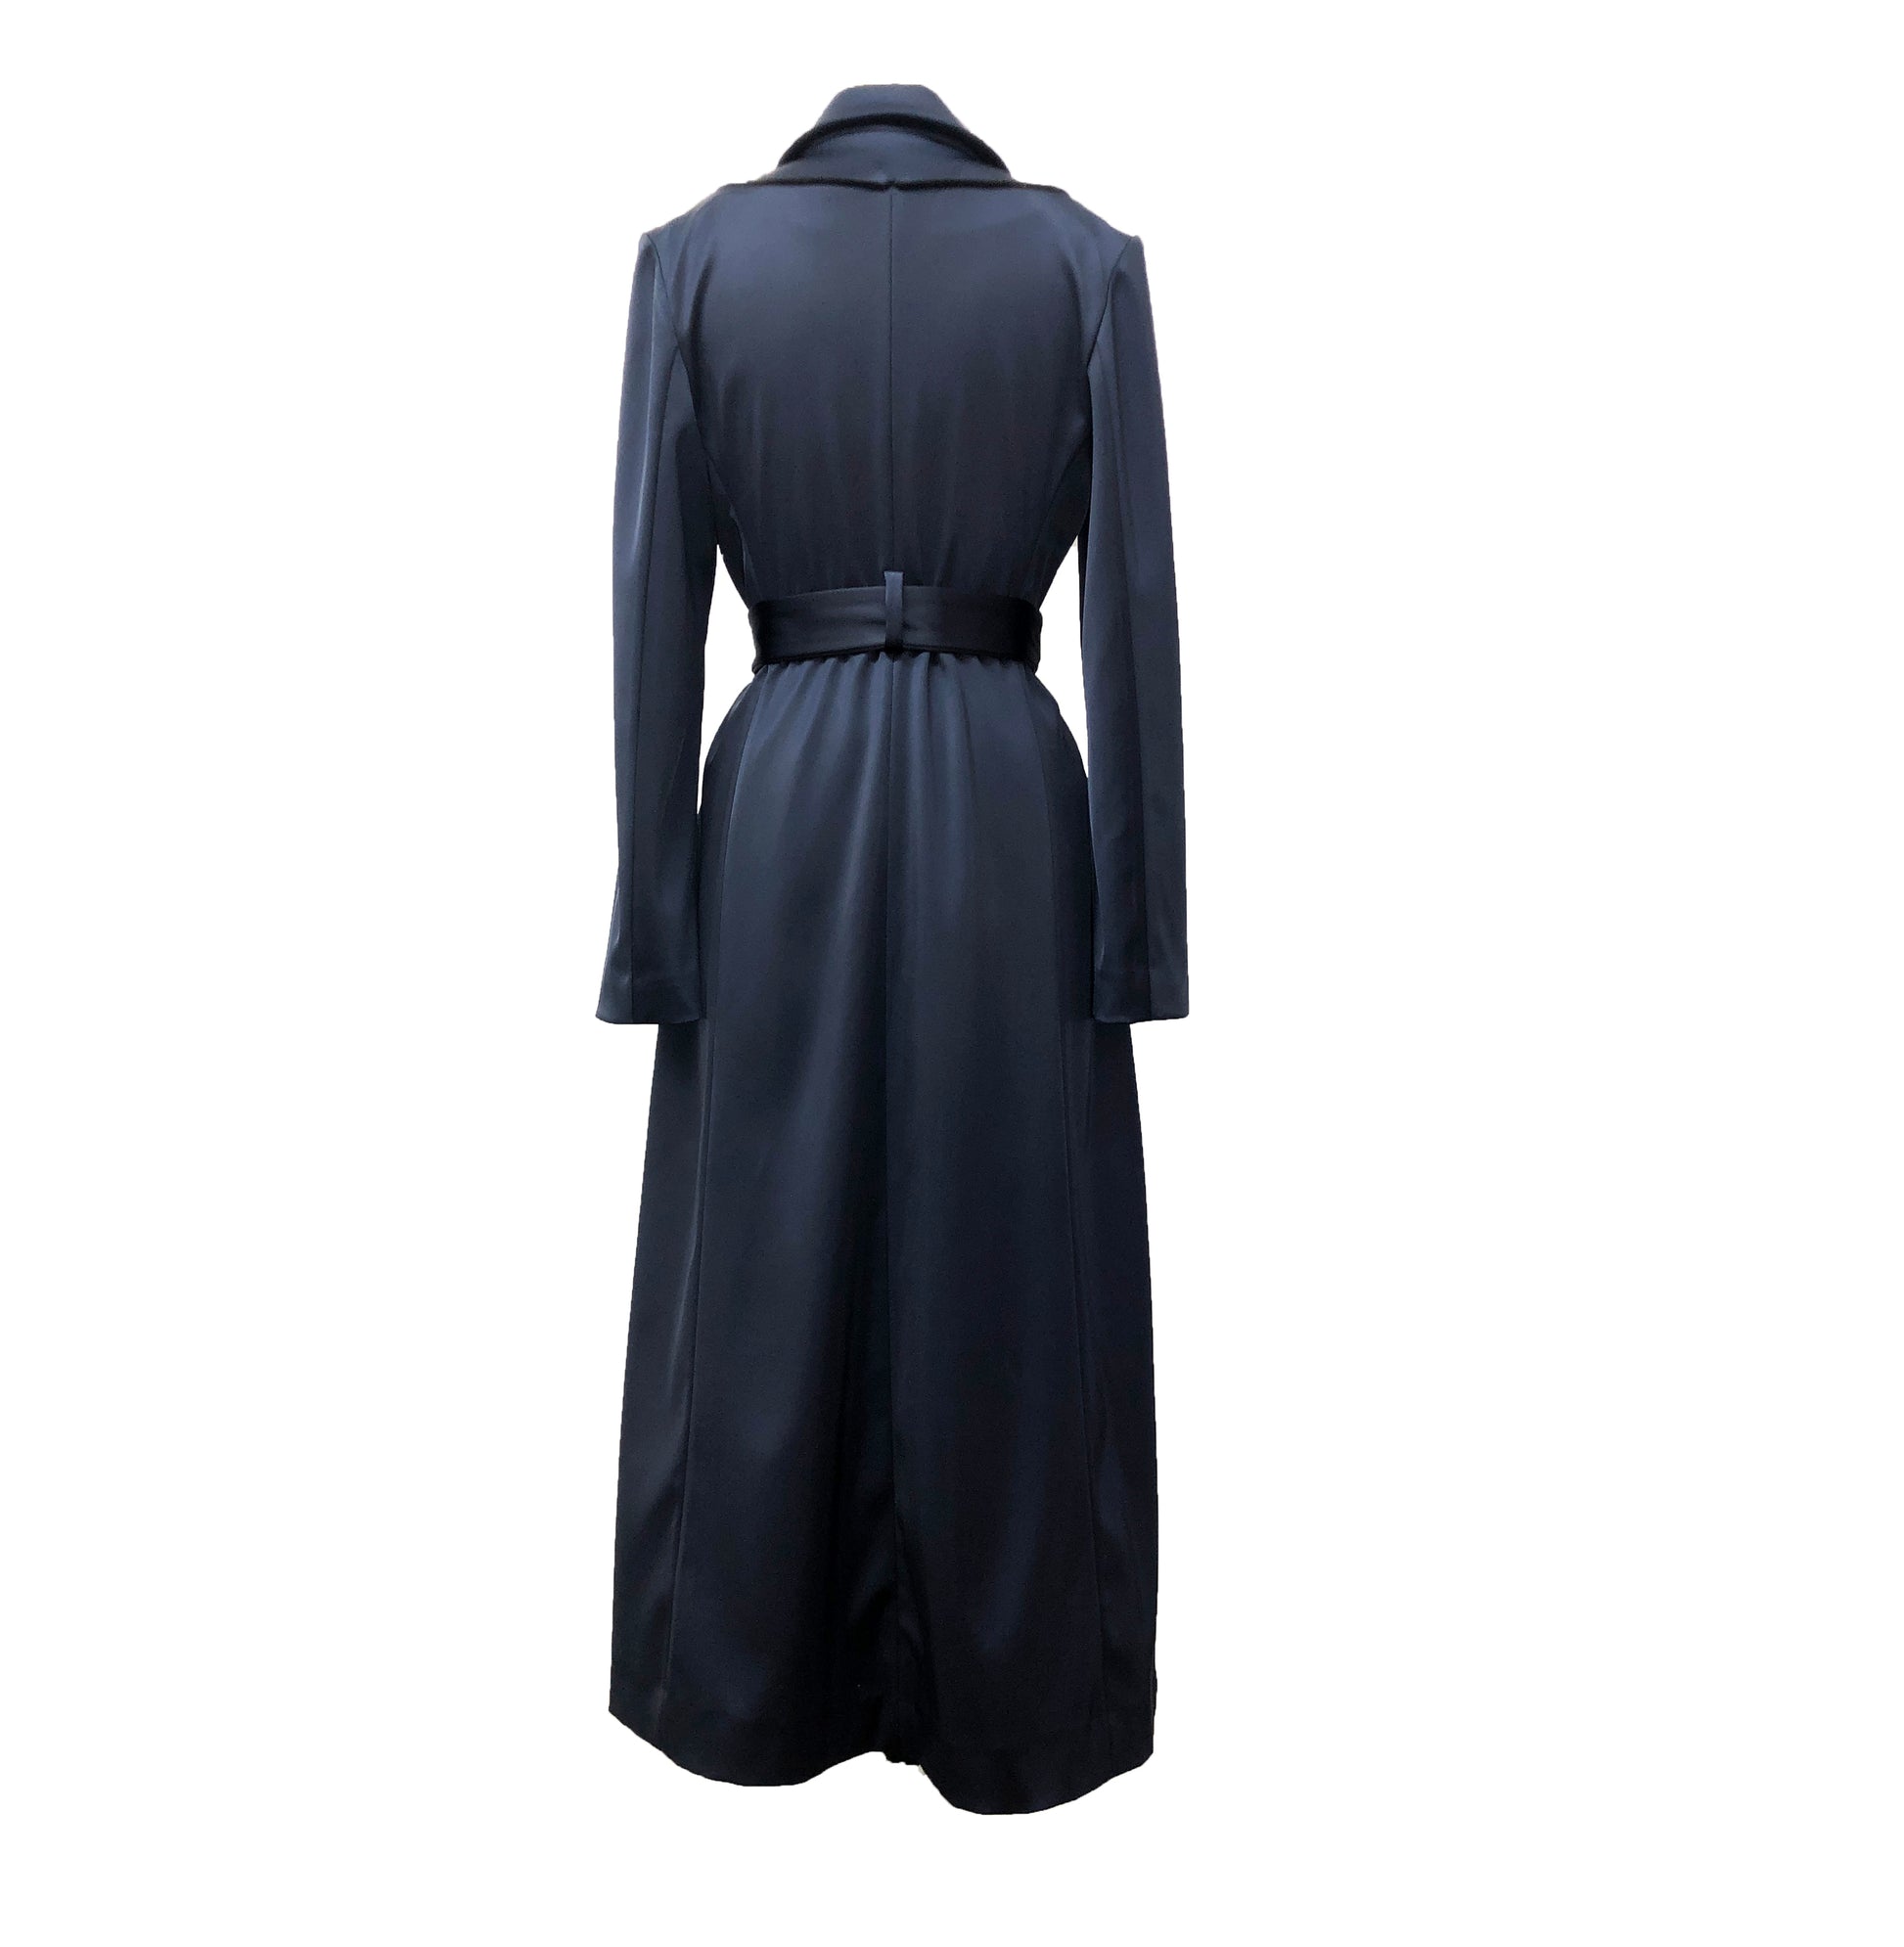 Back of navy stretch satin coat with transformable zippers and self tie belt